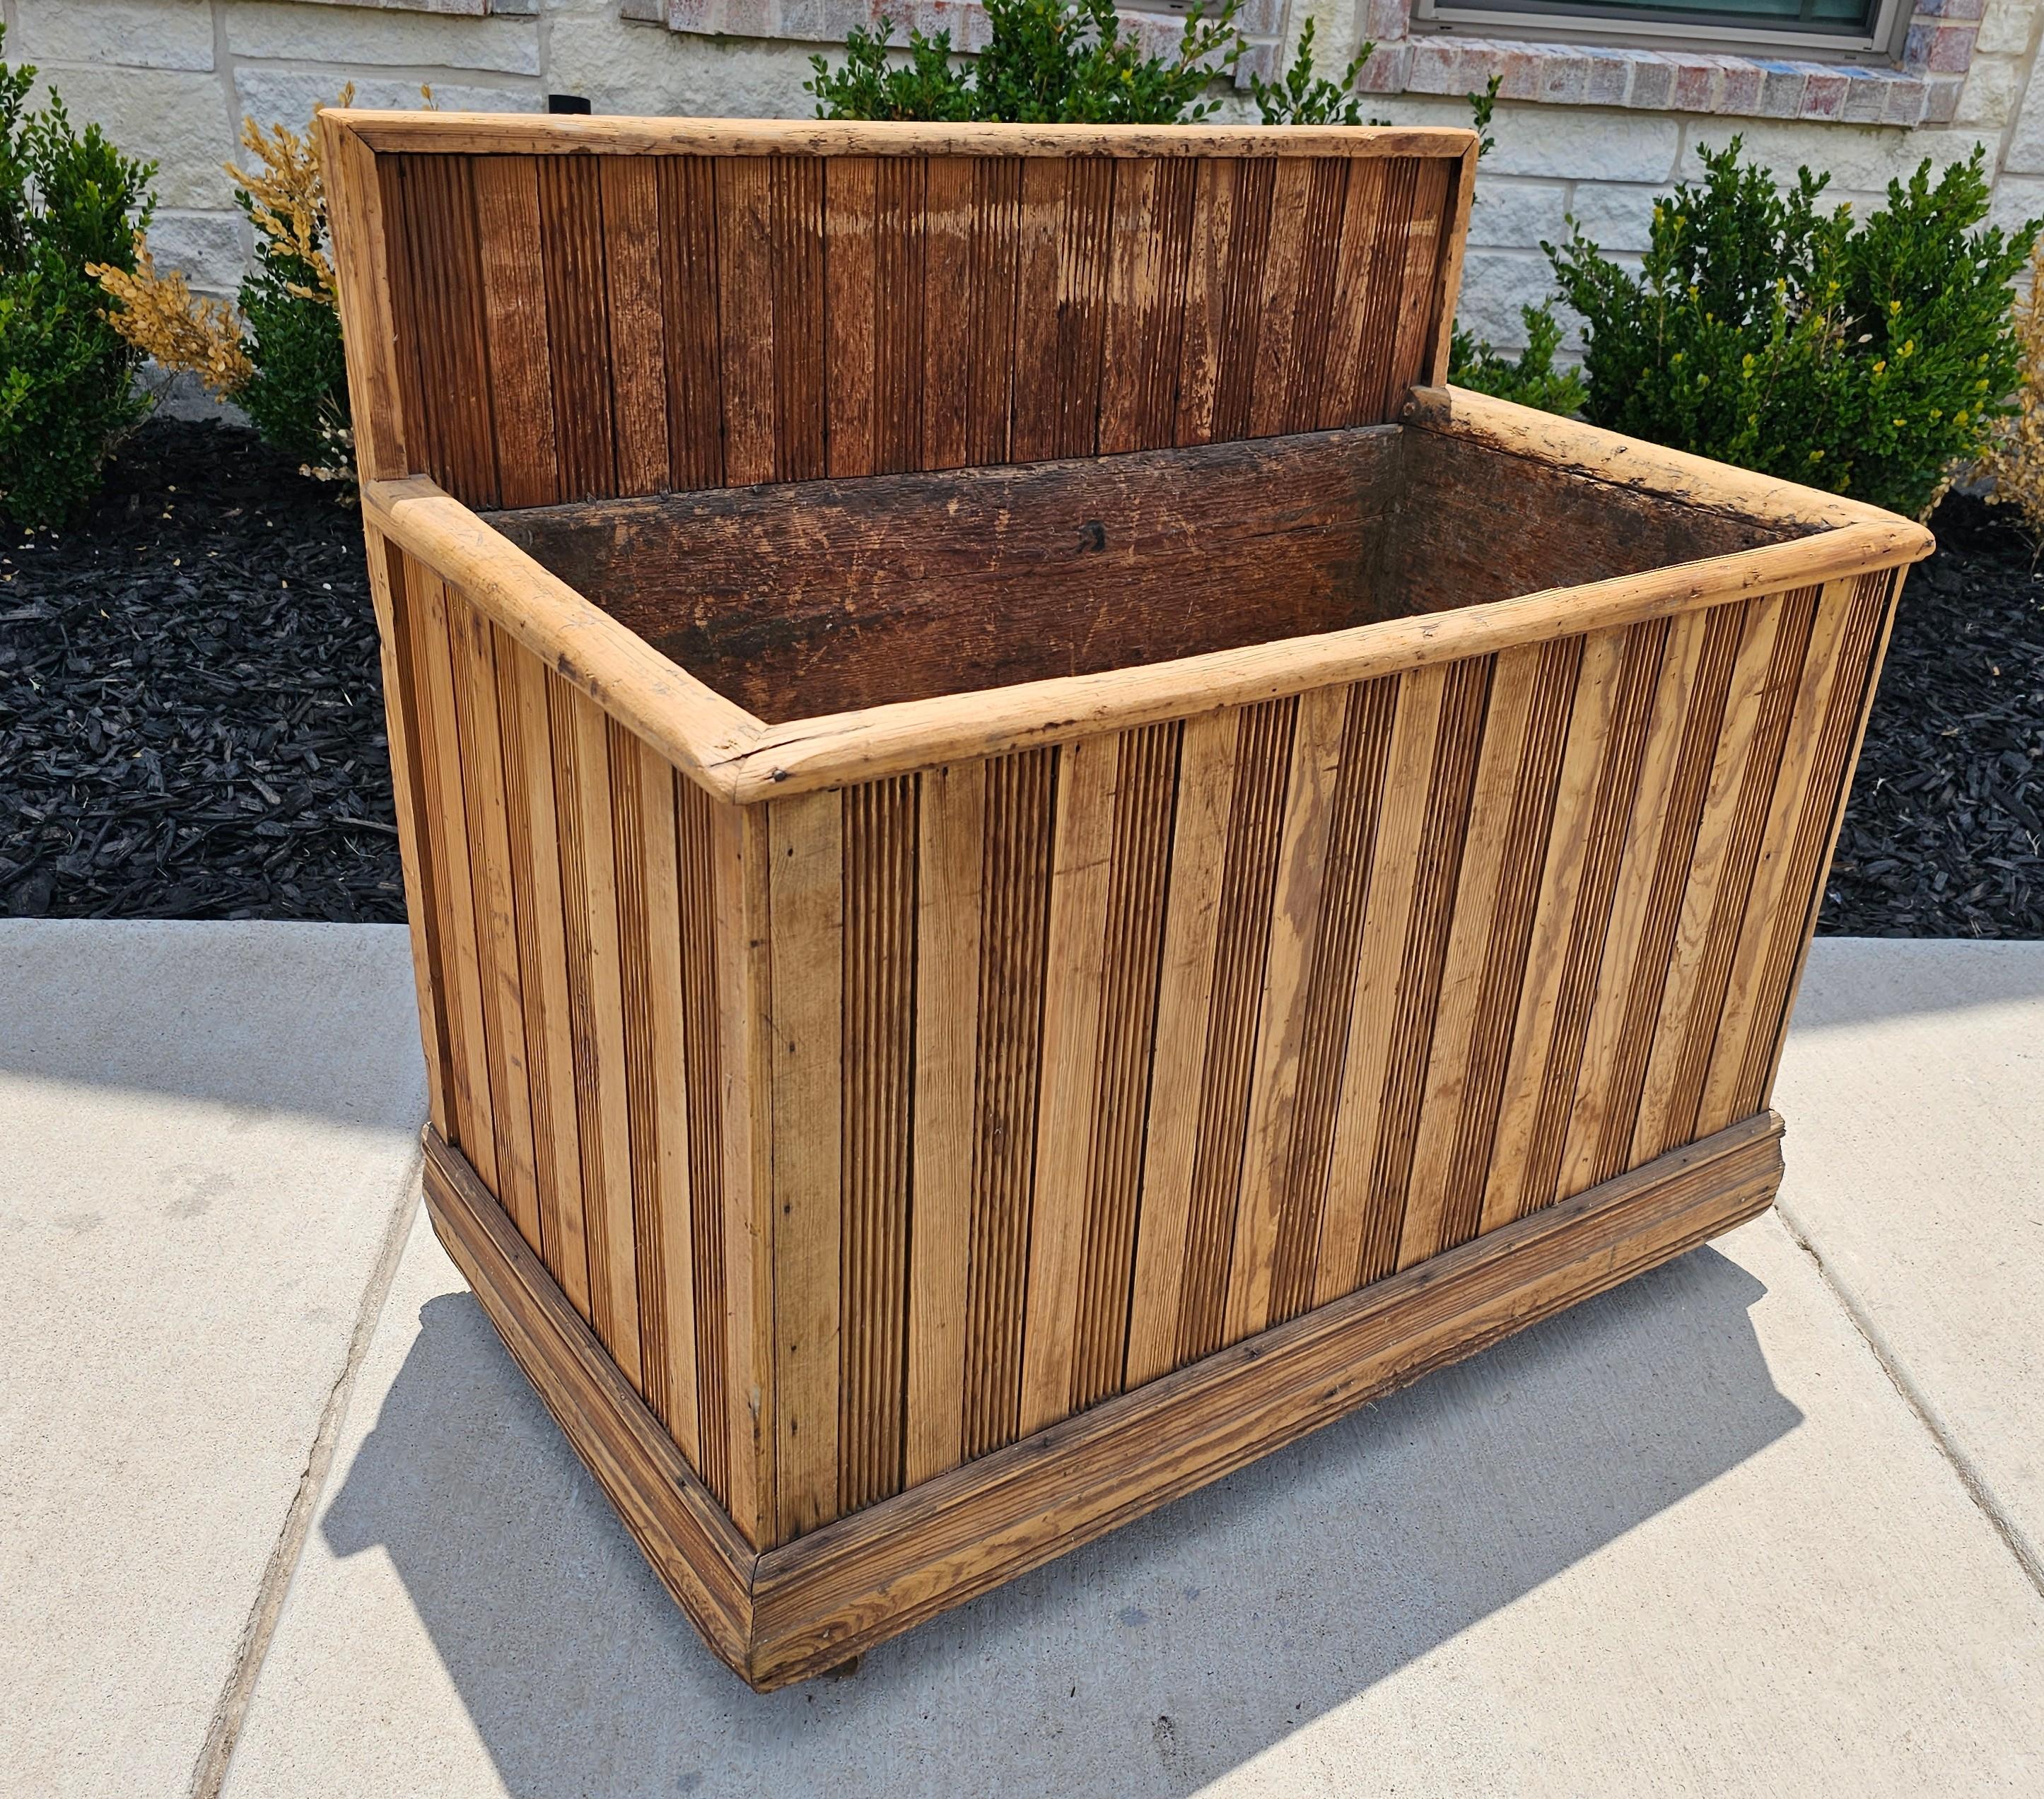 19th Century European Rolling Firewood Bin Storage Chest In Good Condition For Sale In Forney, TX